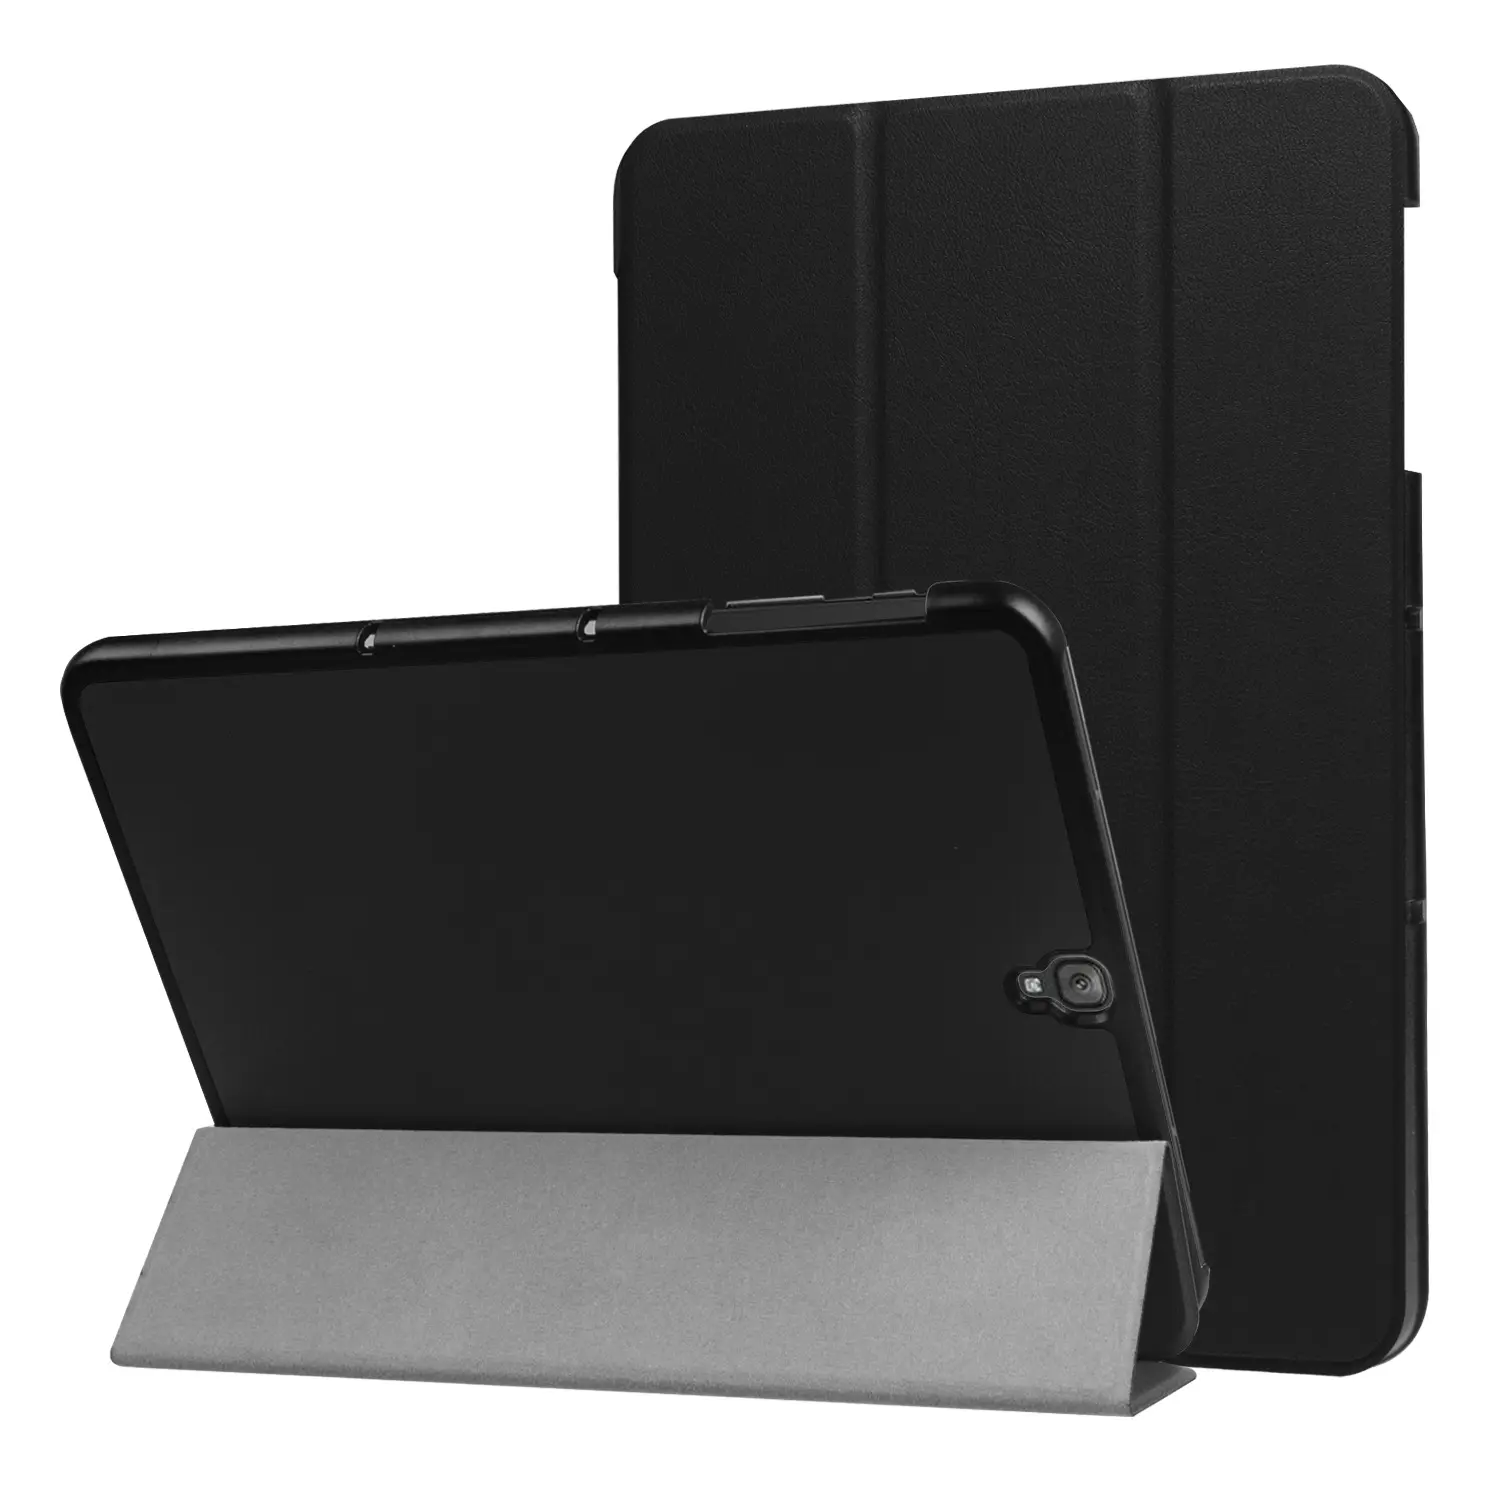 Trifold Slim Stand Leather Flip Case Hard Shell Cover for Samsung Galaxy Tab S3 9.7 SM-T820 SM-T825